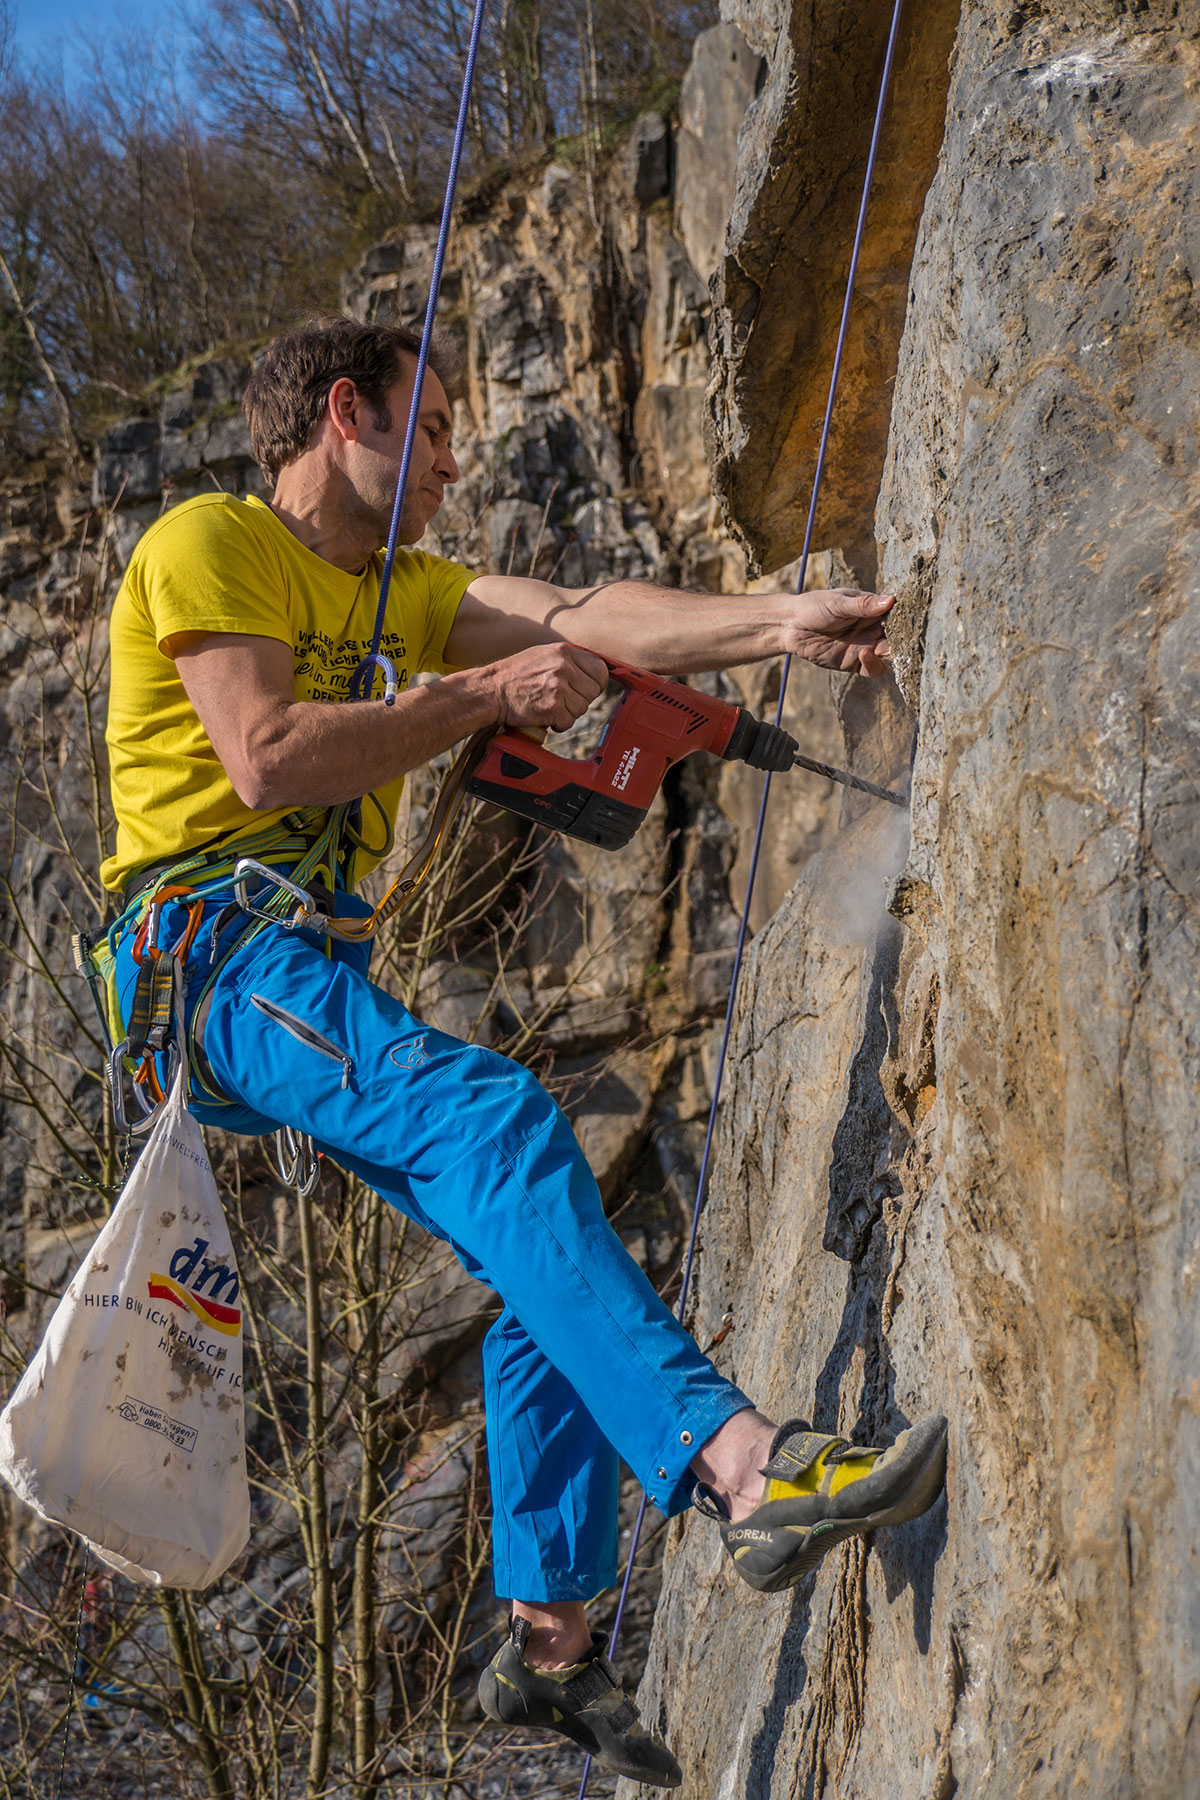 Warstein, Hillenberg, Route „Butterfly Effect“ (Combination to „Sidewinder“), 9-, Climber Mathias Weck, Photographer: Thihamy Nguyen